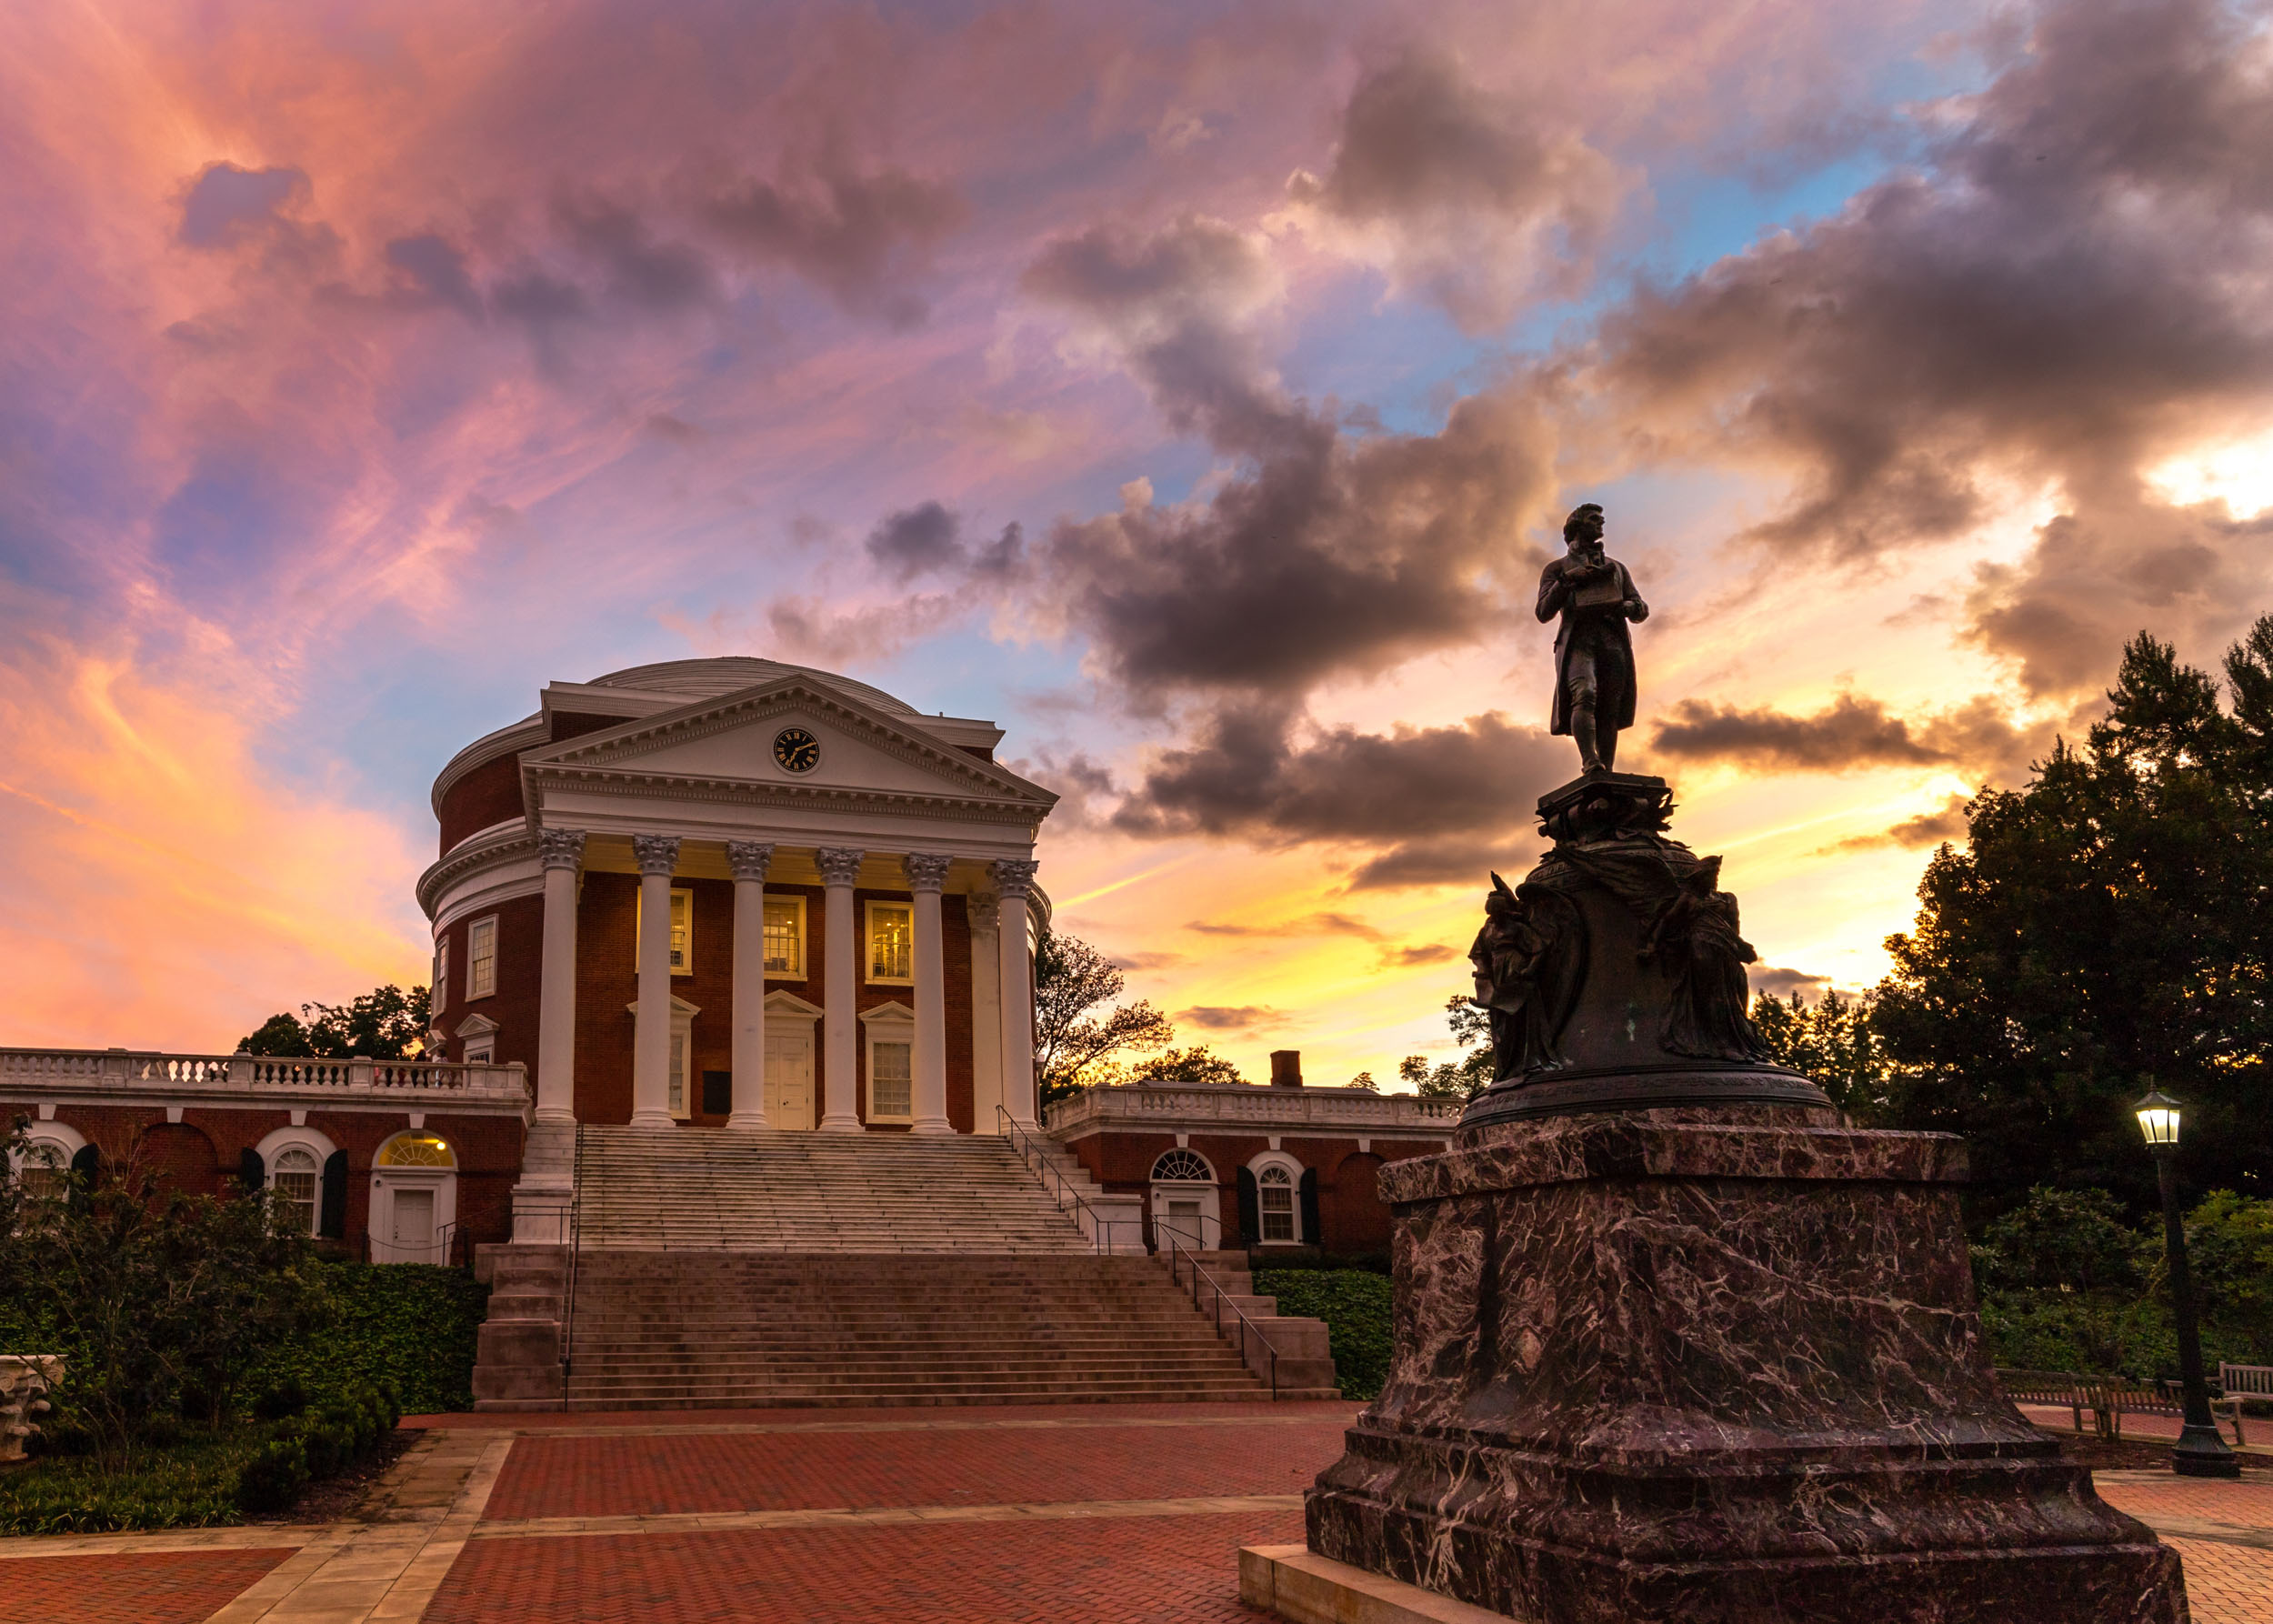 Thomas Jefferson Statue and the Rotunda are surrounded by grey clouds and a pink, yellow, purple, and blue sky